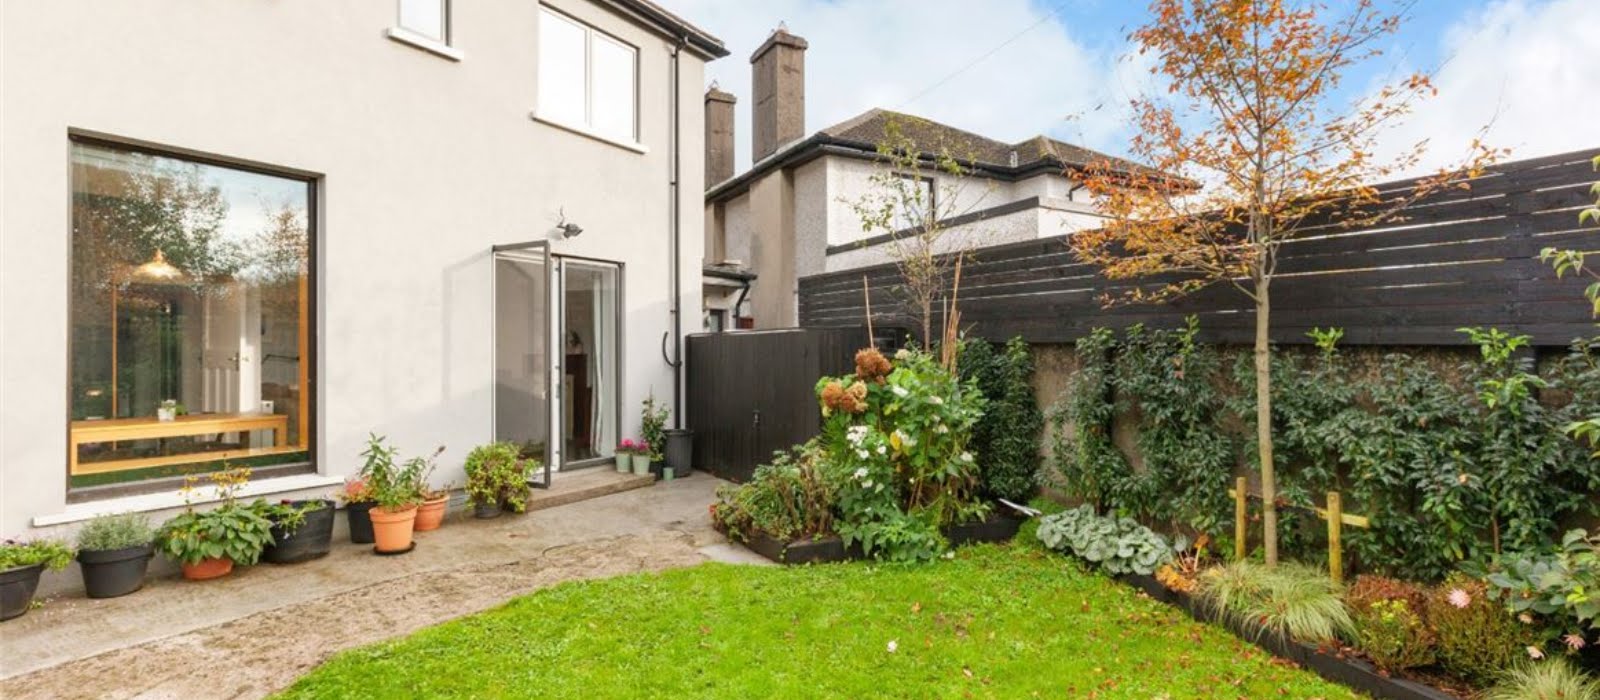 This light-filled Glasnevin home is on the market for €925,000